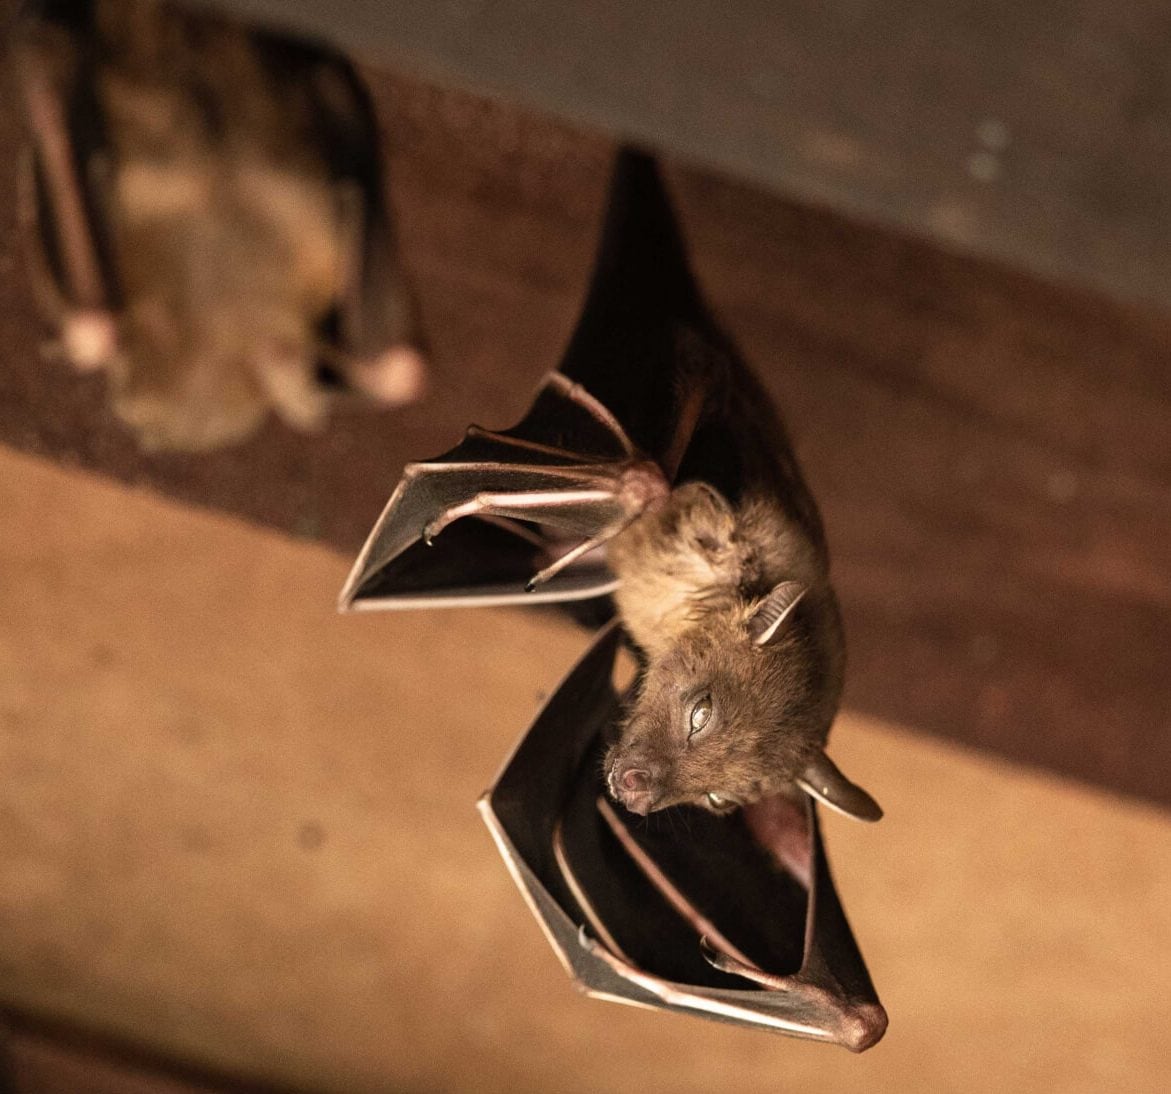 Bat removal services from wildlife removal experts in Minneapolis, Minnesota